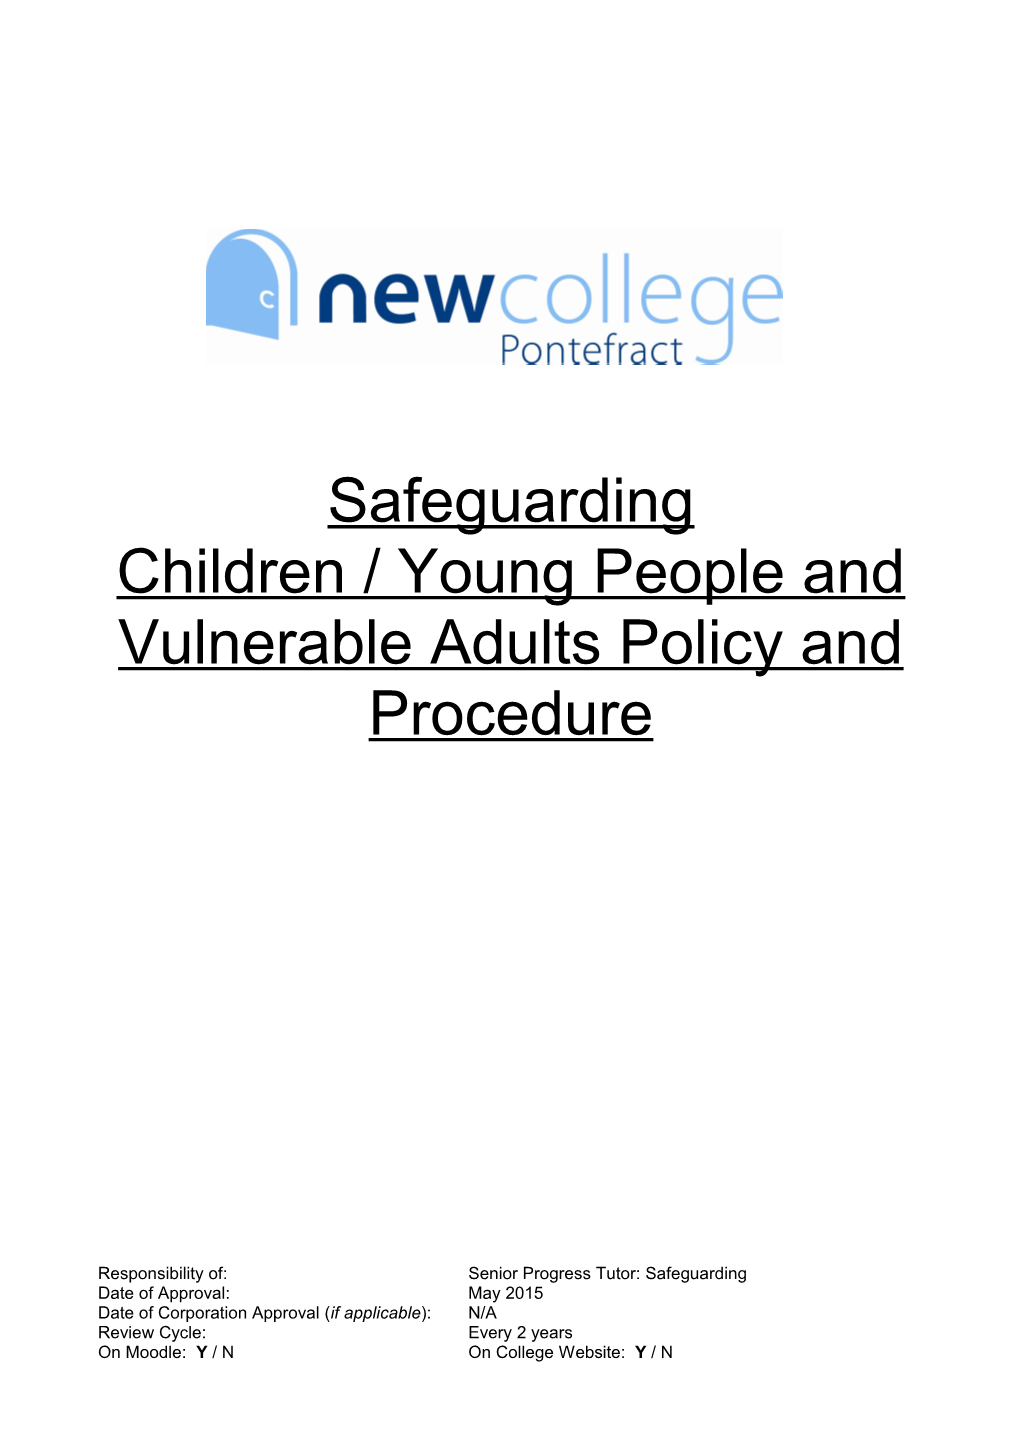 Children / Young People and Vulnerable Adultspolicy and Procedure